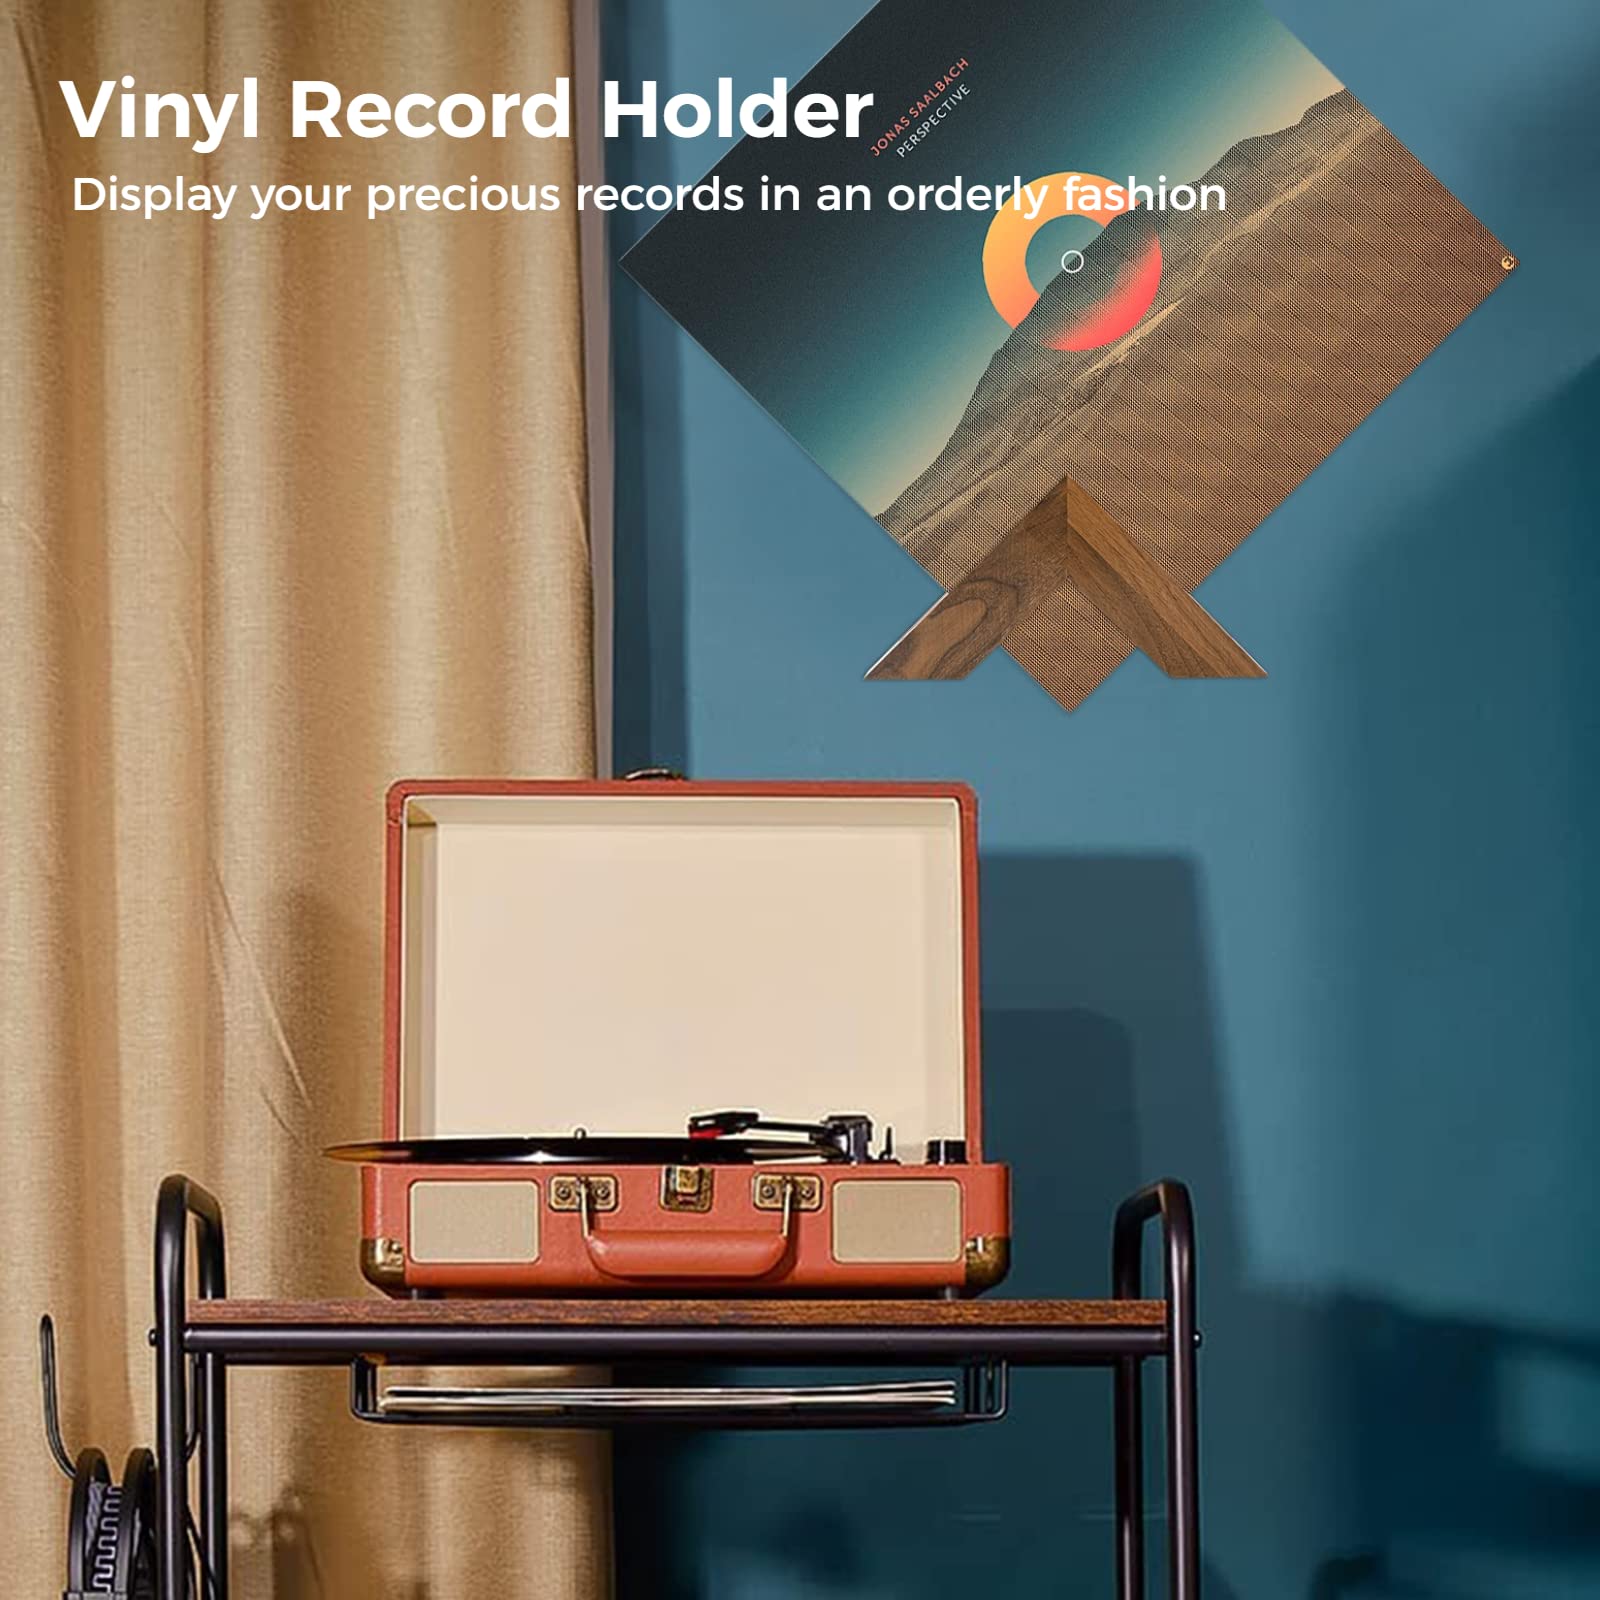 TIMCORR Vinyl Record Holder Set : Vinyl Wall Mount for Record Display, Pine Wood Album Shelf with Sticky Transparent Tapes Hanging on the Wall (Beech Wood Set of 2) (Walnut Wood Set of 2)